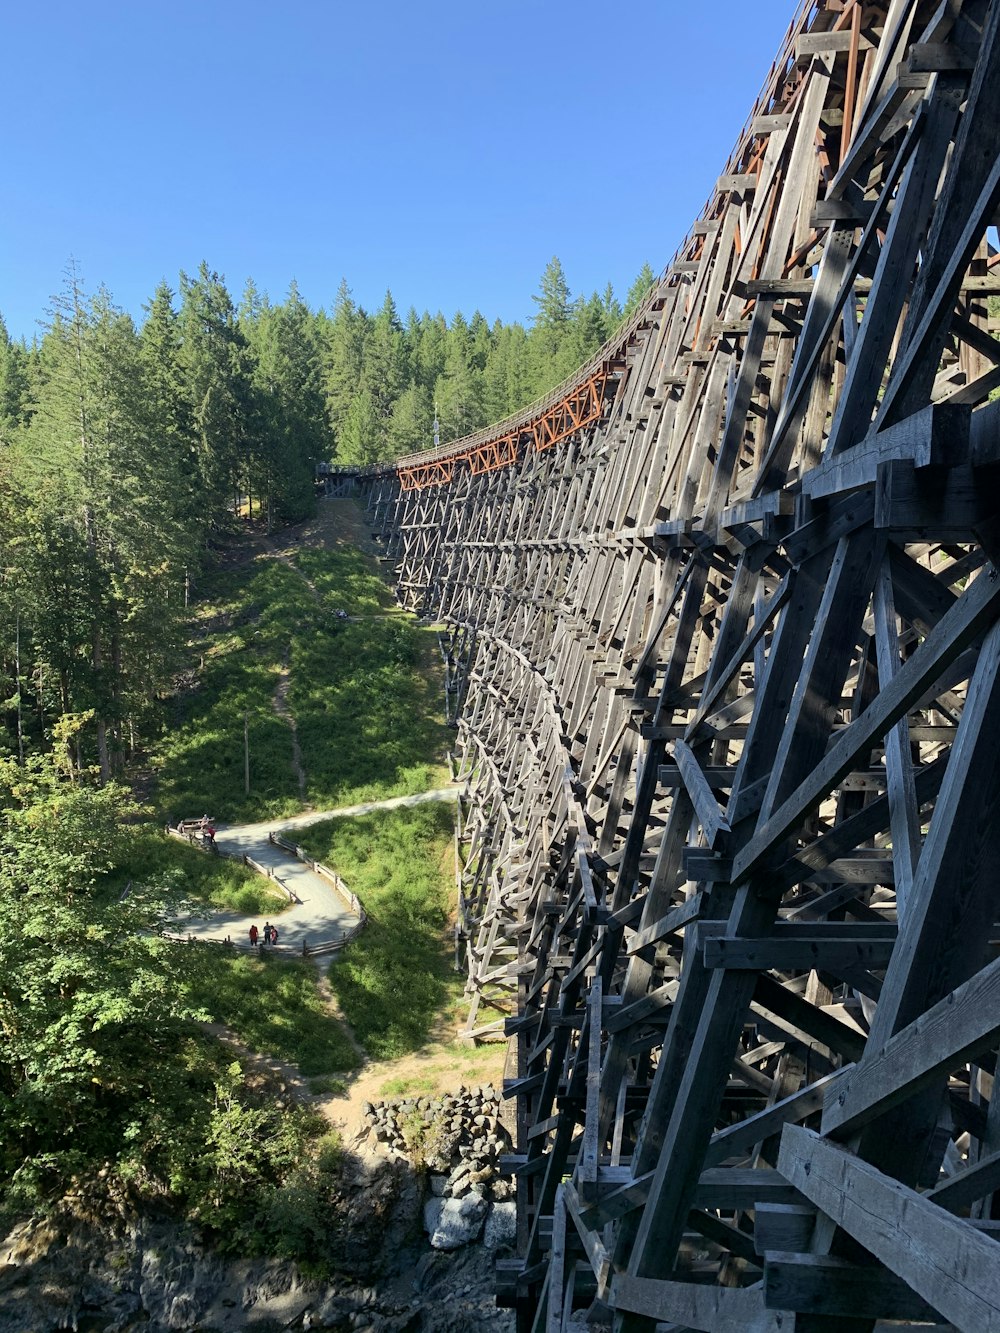 The trestle in Cowichan BC